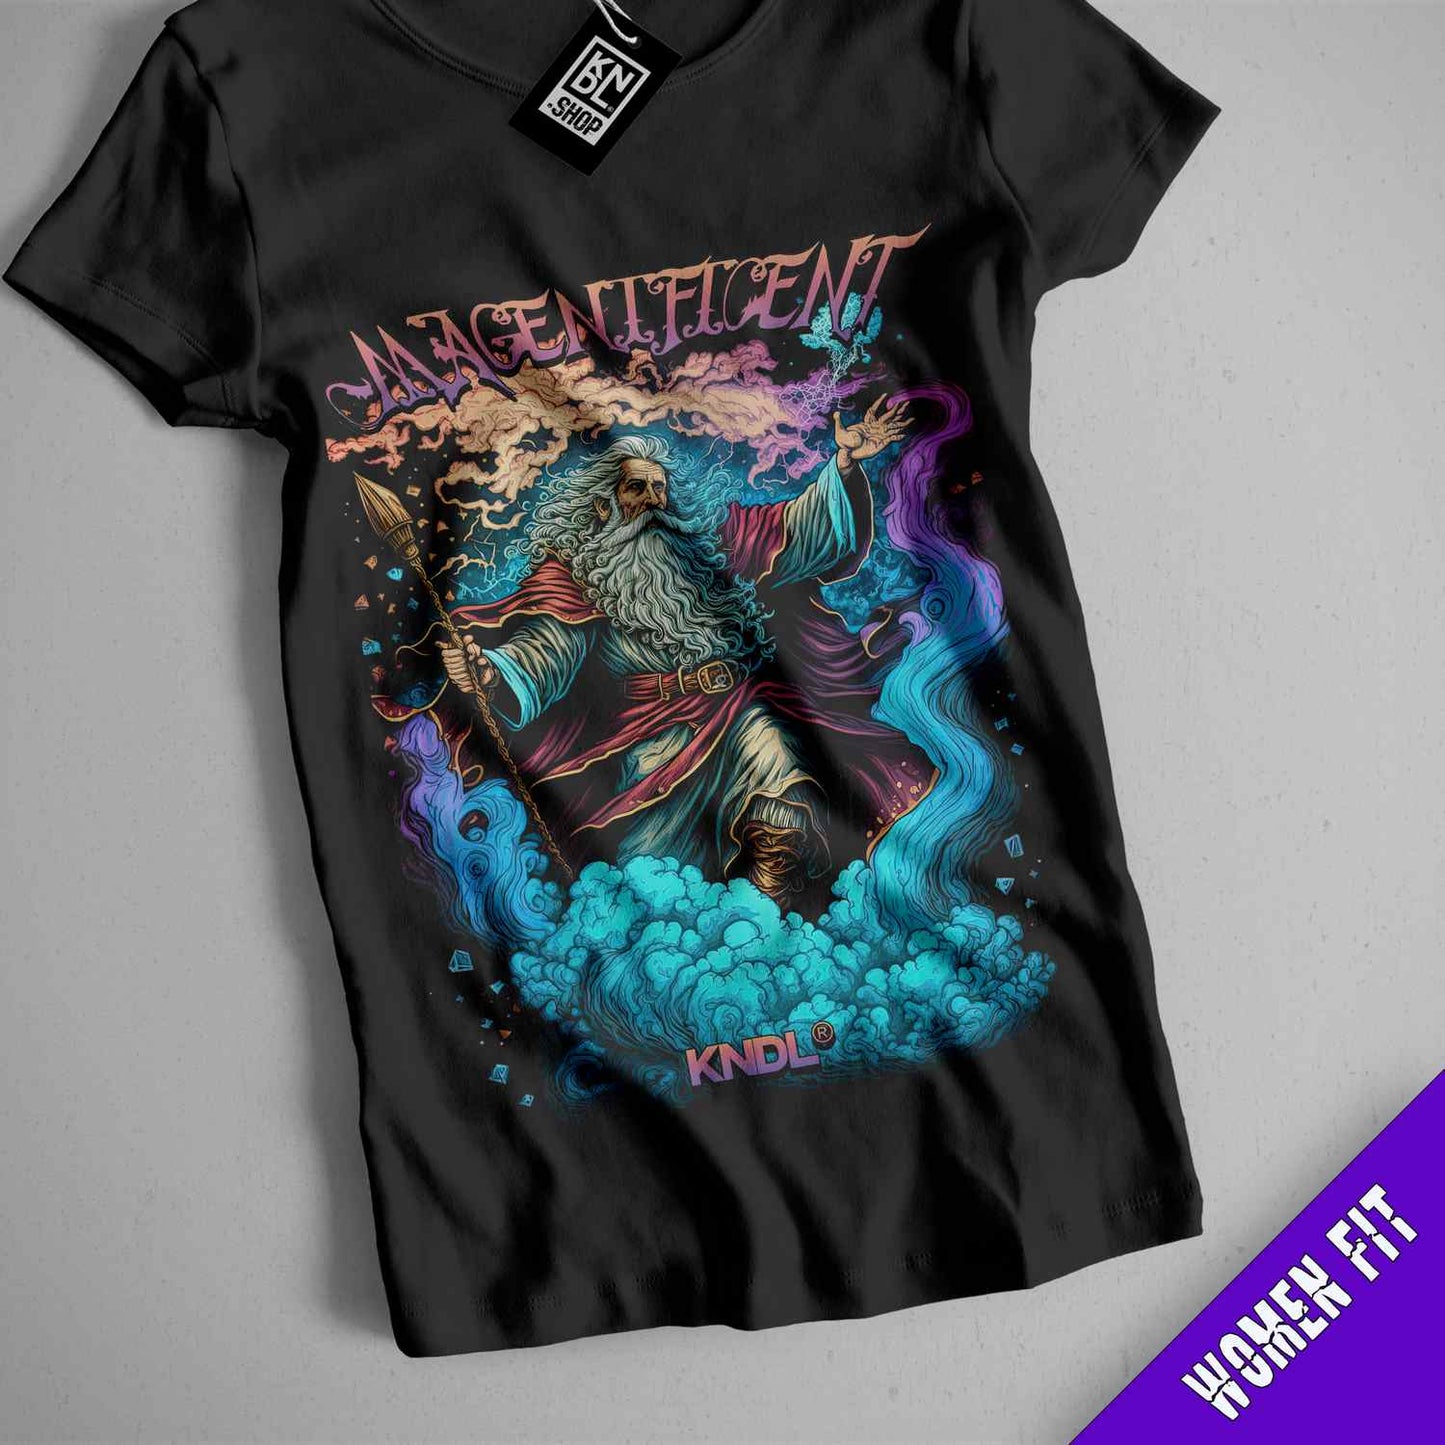 a black t - shirt with an image of a wizard on it